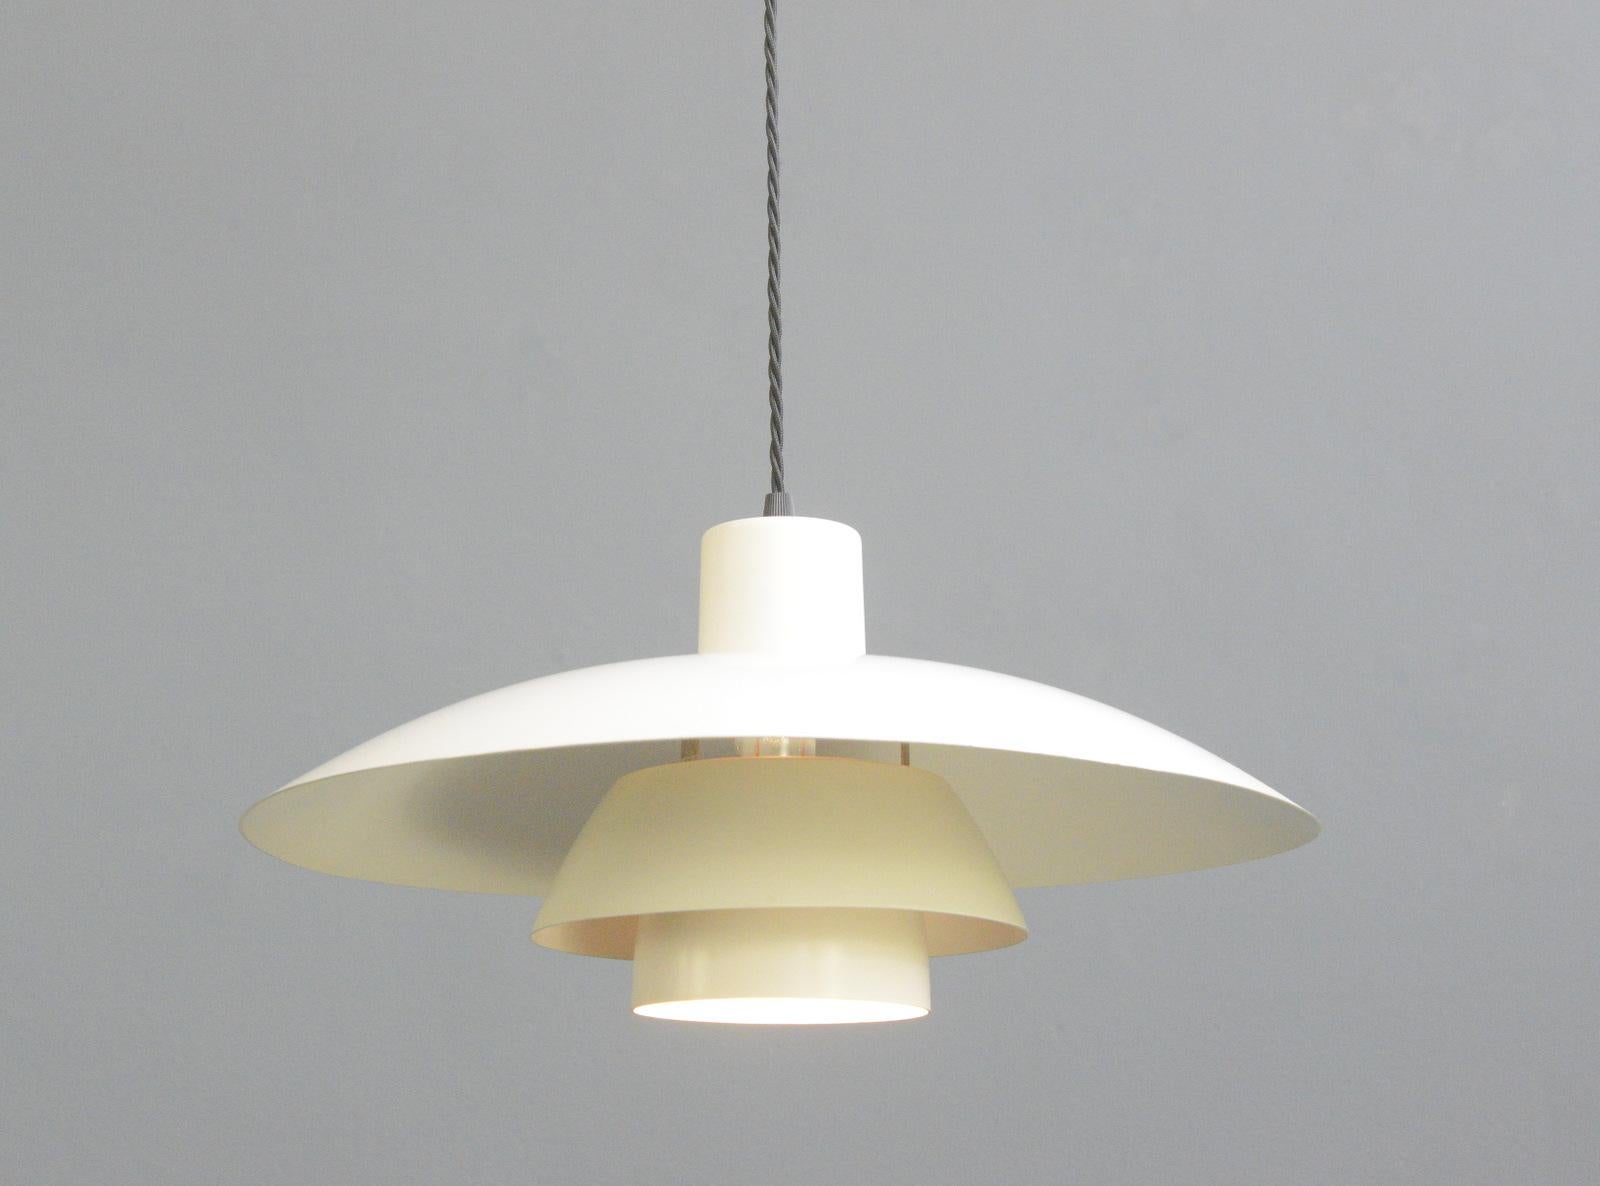 Model PH4 pendant lights by Louis Poulson Circa 1960s

- Comes with 150cm of cable
- Takes E27 fitting bulbs
- Made from aluminium
- Designed by Poul Henningsen
- Made by Louis Poulson
- Model PH4
- Danish ~ 1960s
- 40cm wide x 20cm